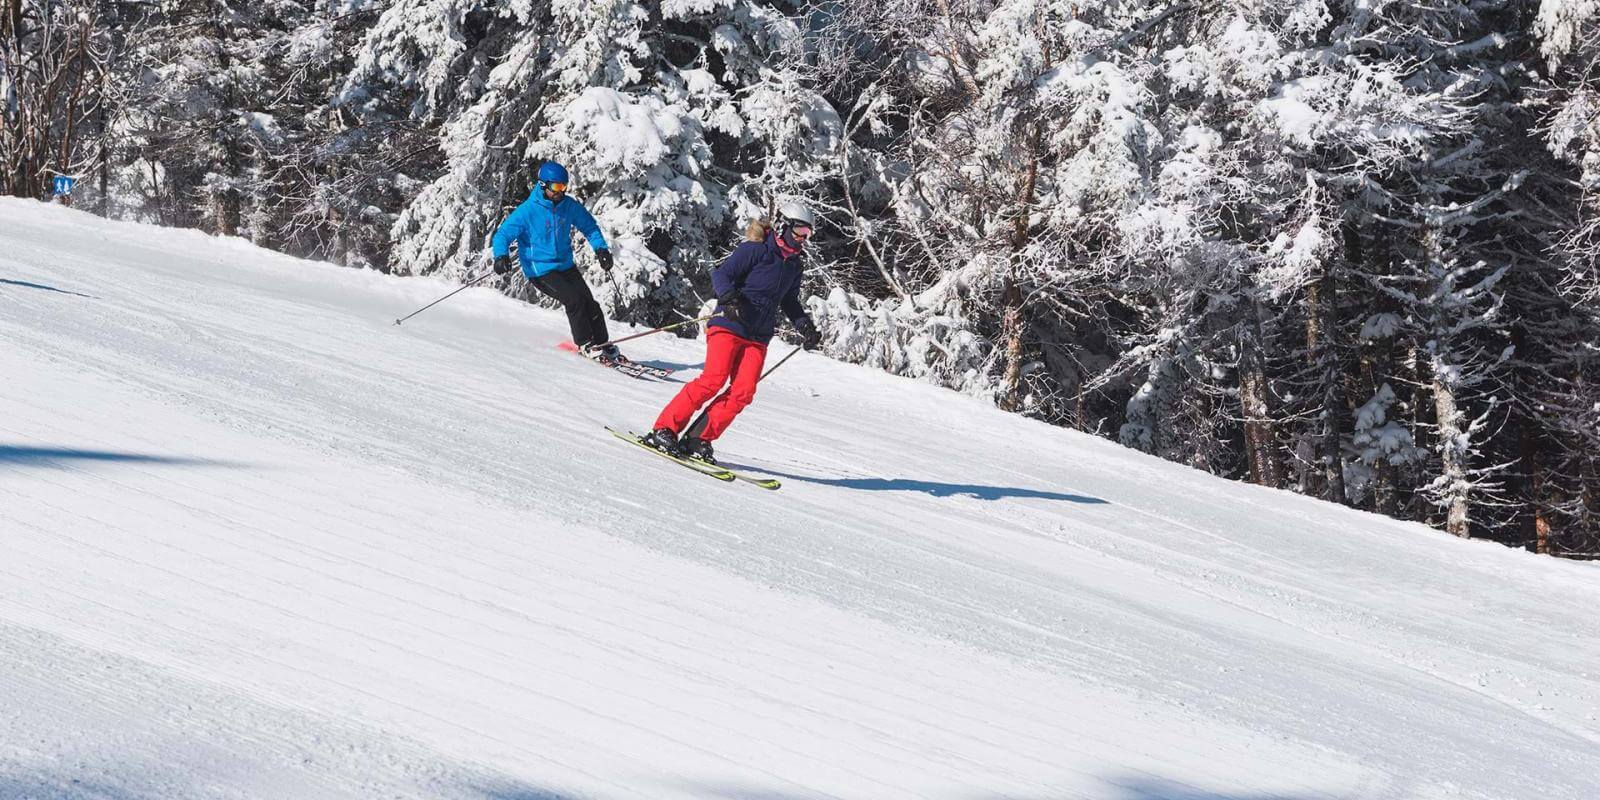 A man and a woman go downhill skiing at the Mont-Sainte-Anne resort.